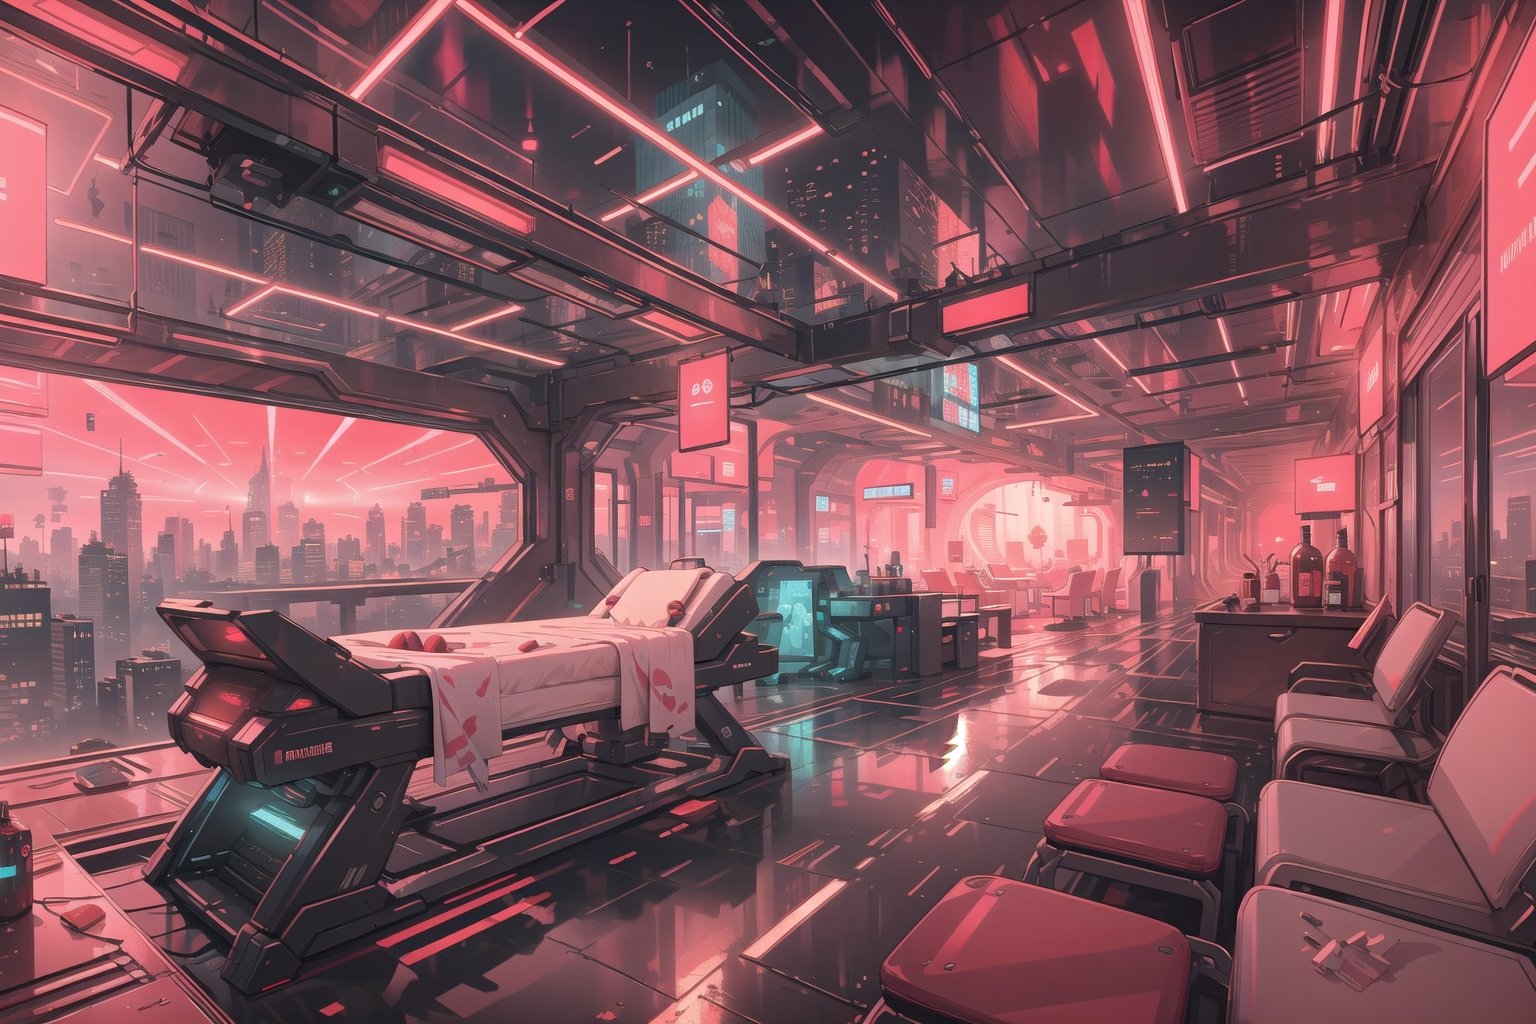 Create a digital illustration featuring a giant luxurious massage room of futuristic style, with a hologram projector that has the shape of a large tube in a corner, with bright red lights and a gorgeous view of a cyberpunk city.